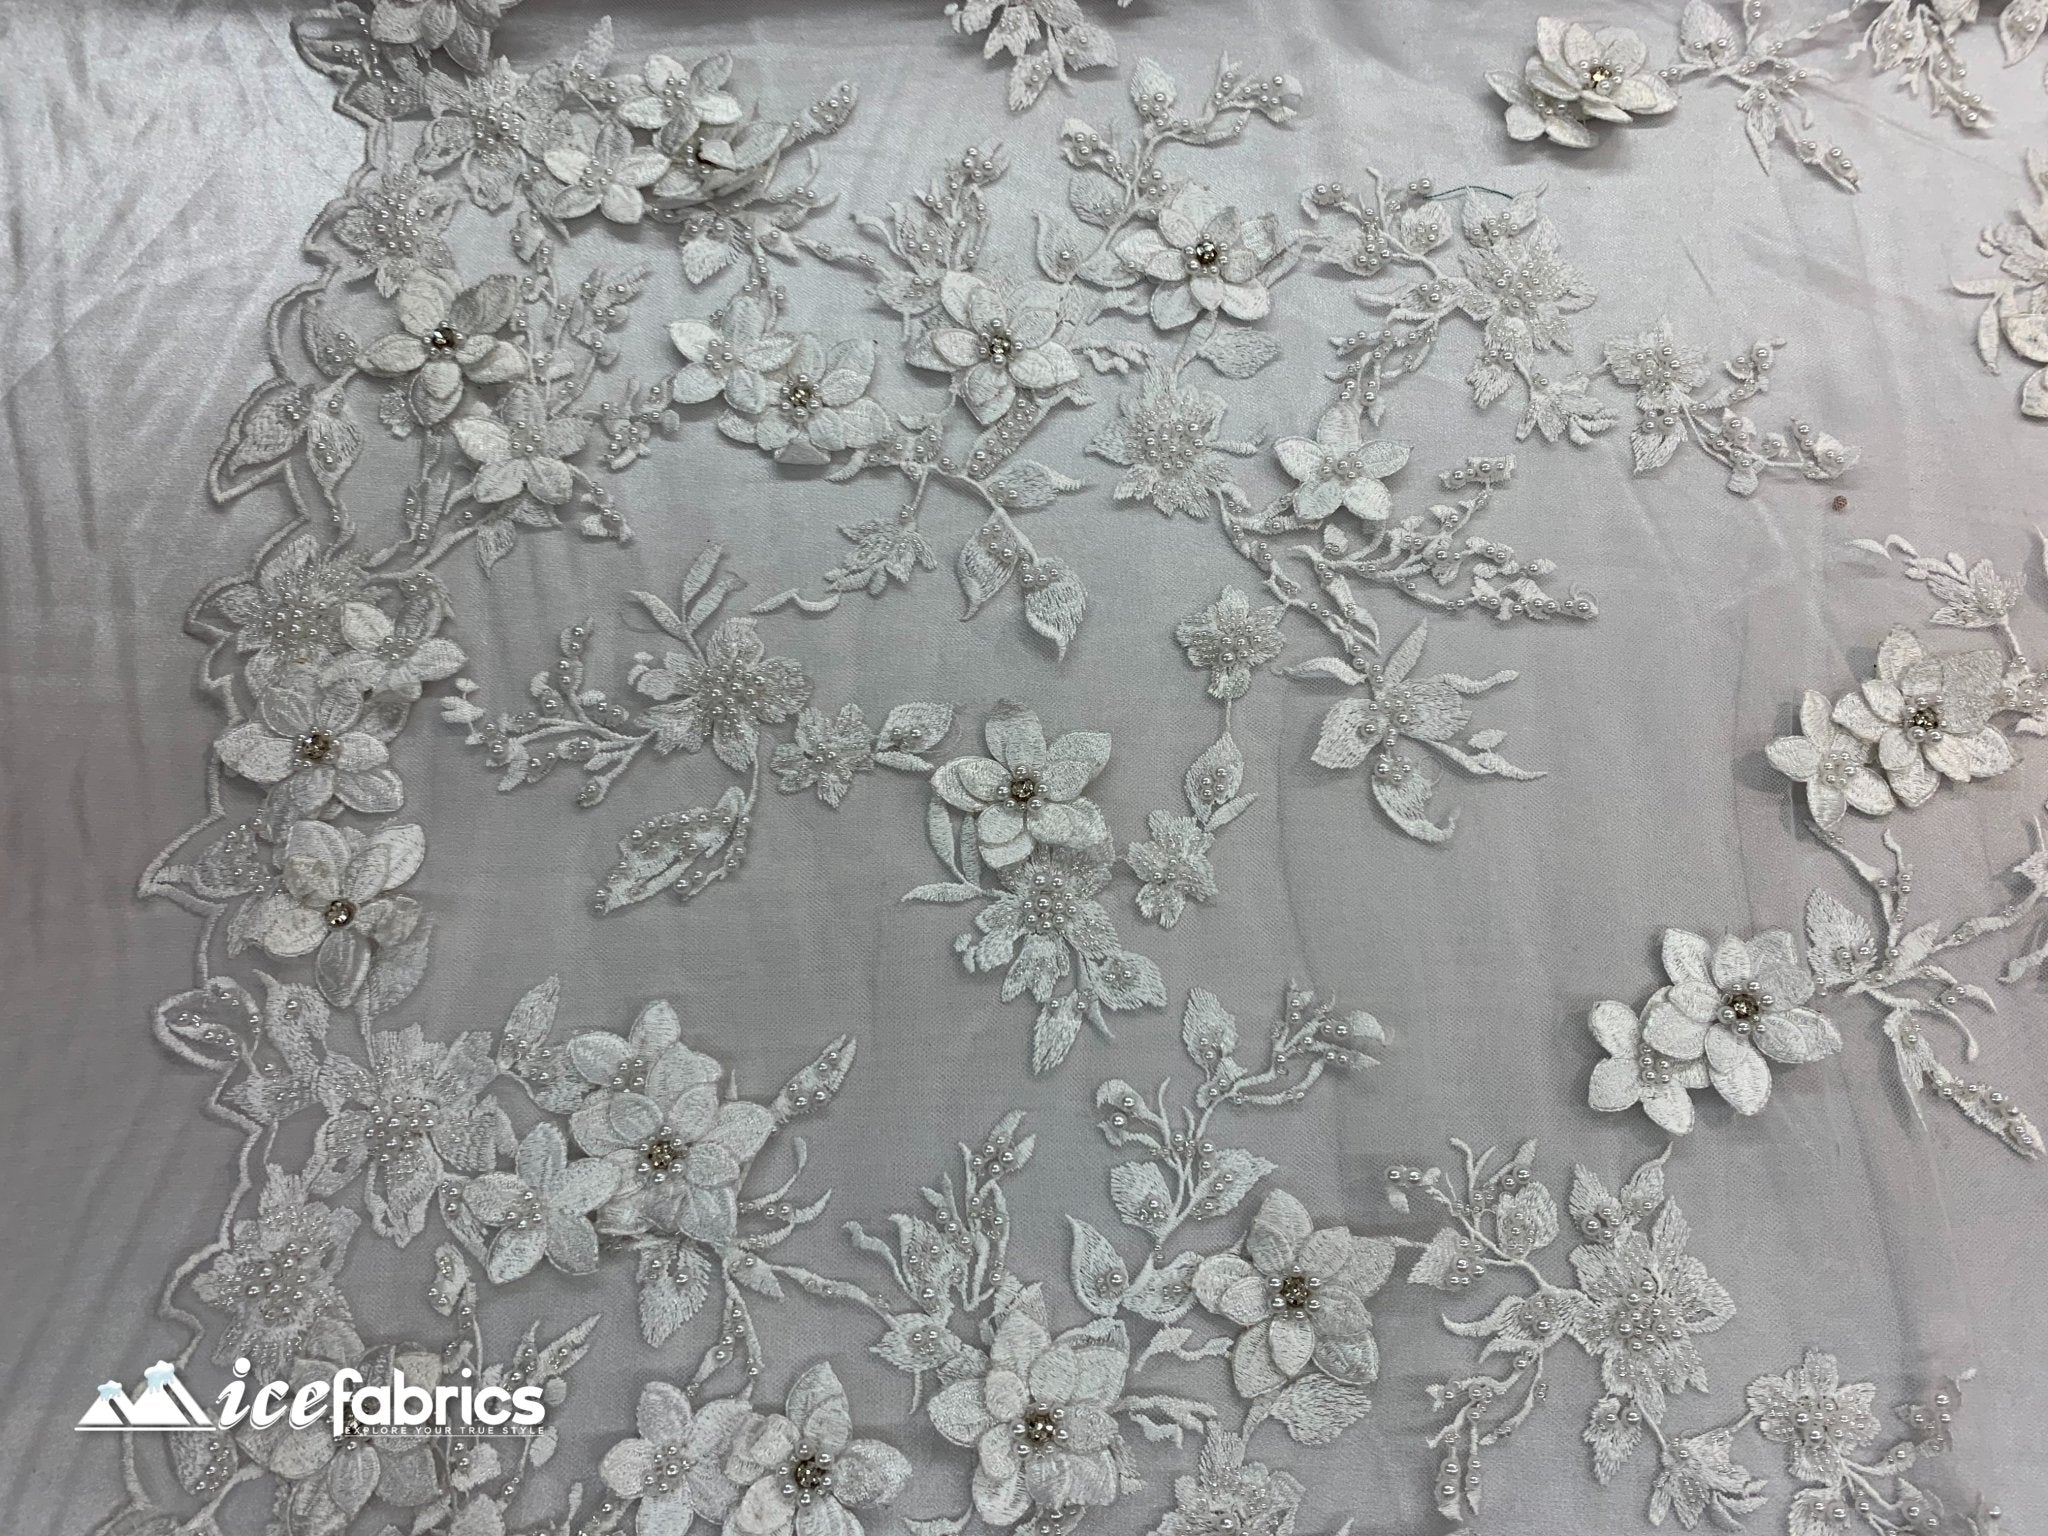 Flowers Embroidered Beaded Fabric/ Mesh Lace Fabric/ Bridal Fabric/ICE FABRICSICE FABRICSWhiteFlowers Embroidered Beaded Fabric/ Mesh Lace Fabric/ Bridal Fabric/ ICE FABRICS White